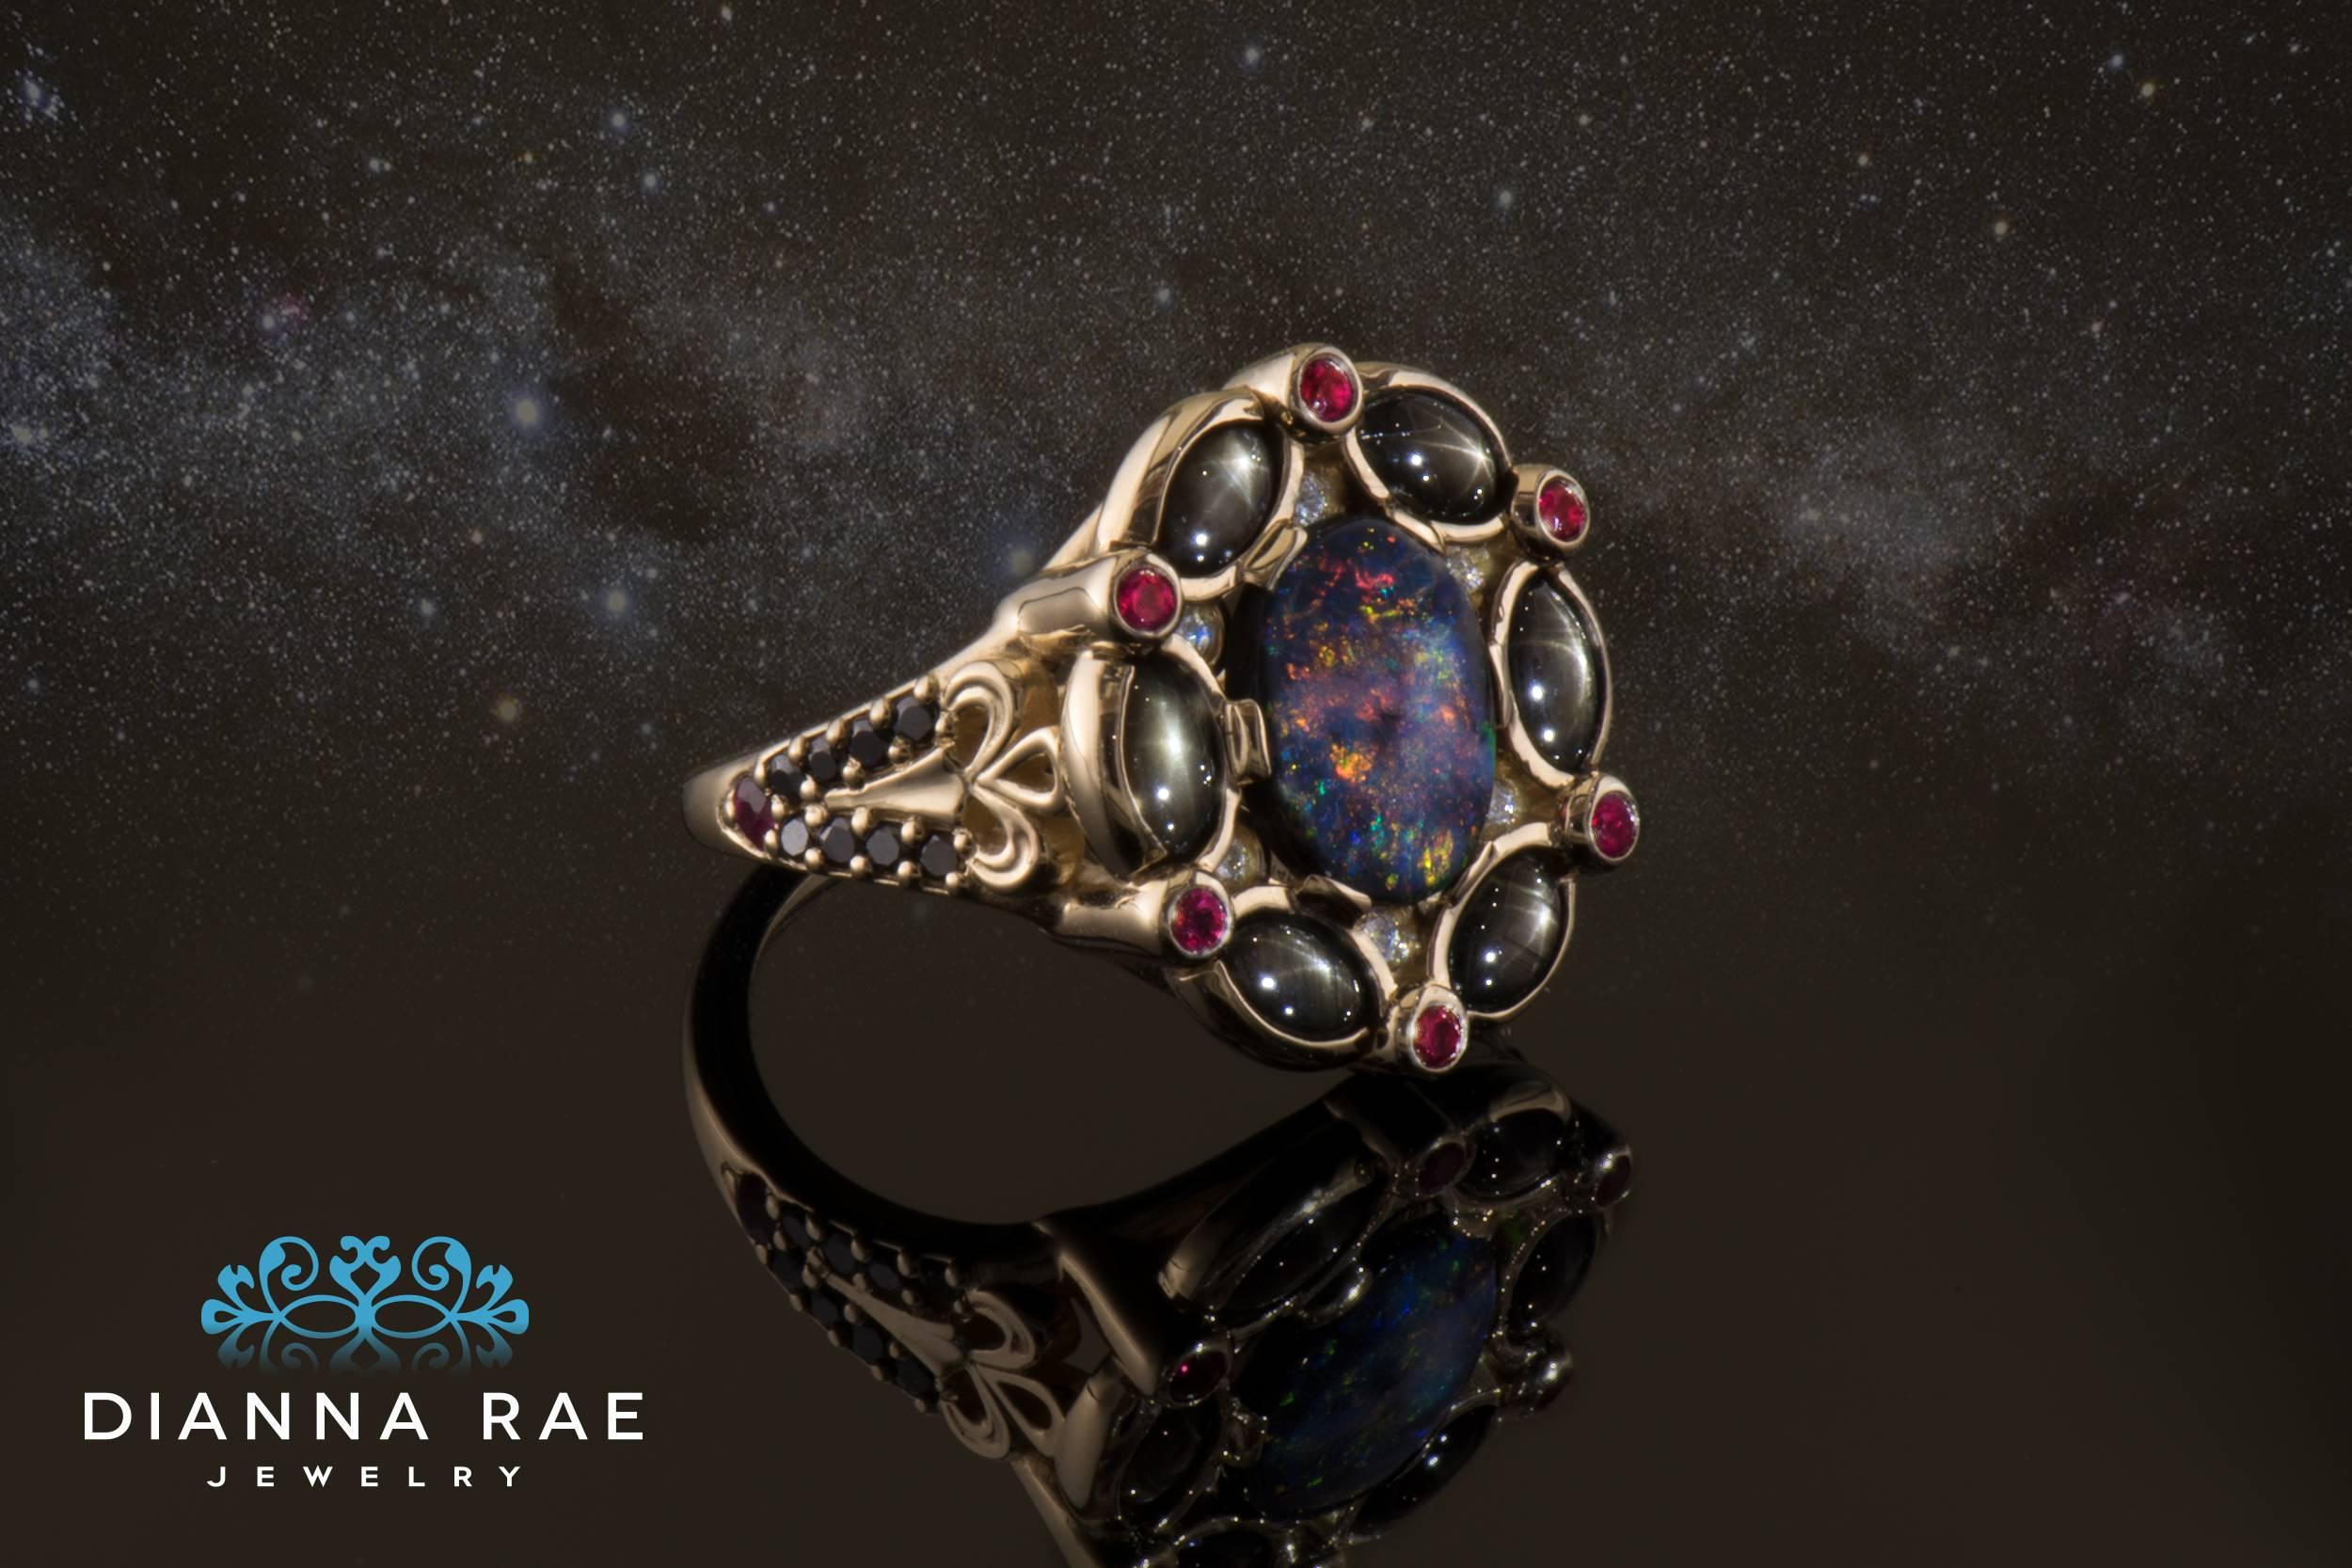 Black Opal Ring Surrounded by Black Star Sapphires, Diamonds and Burmese Rubies

This Dianna Rae Original is truly a one-of-a-kind.  Named 